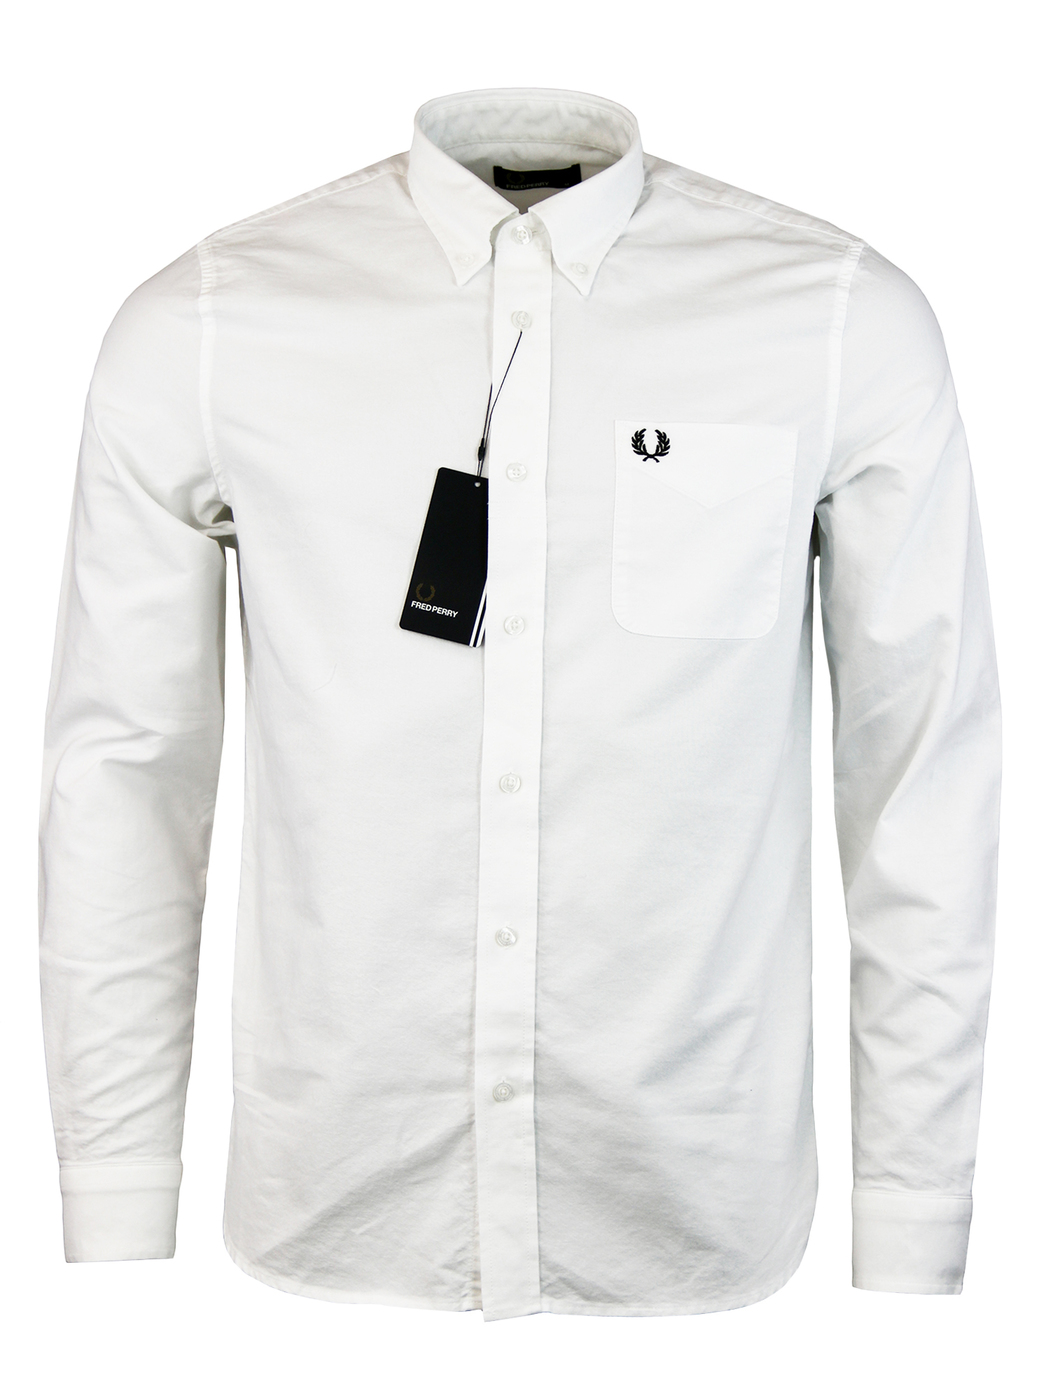 FRED PERRY Retro Indie Mod Classic Oxford Shirt